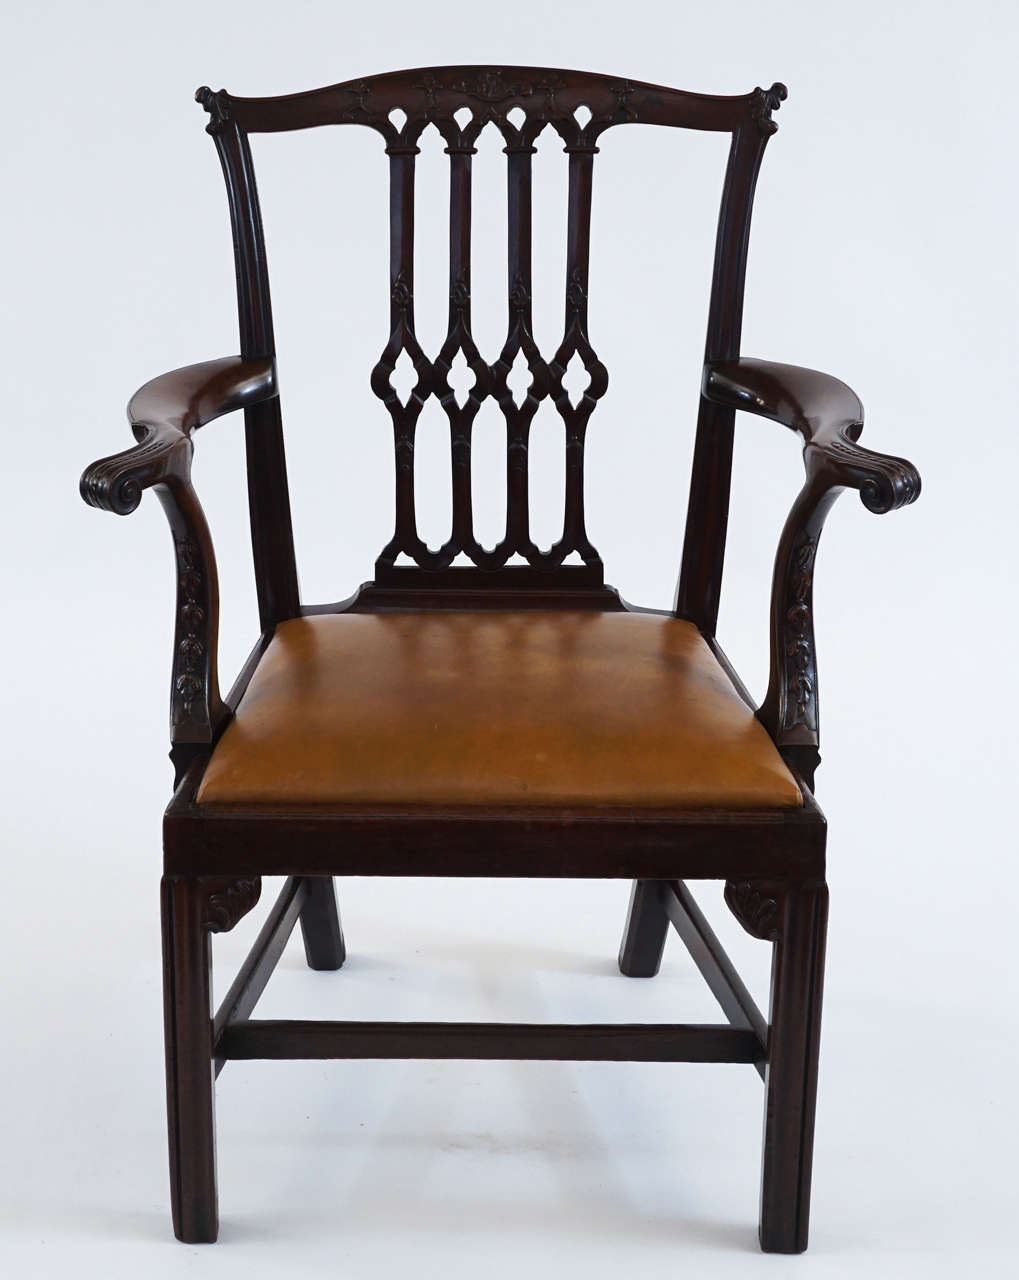 Fine English George III period, circa 1770 carved mahogany armchair in Thomas Chippendale 'Gothick' manner having a serpentine crest-rail carved with acanthus 'ears' and centre foliate motifs surmounting an open-carved back-splat with central cusped